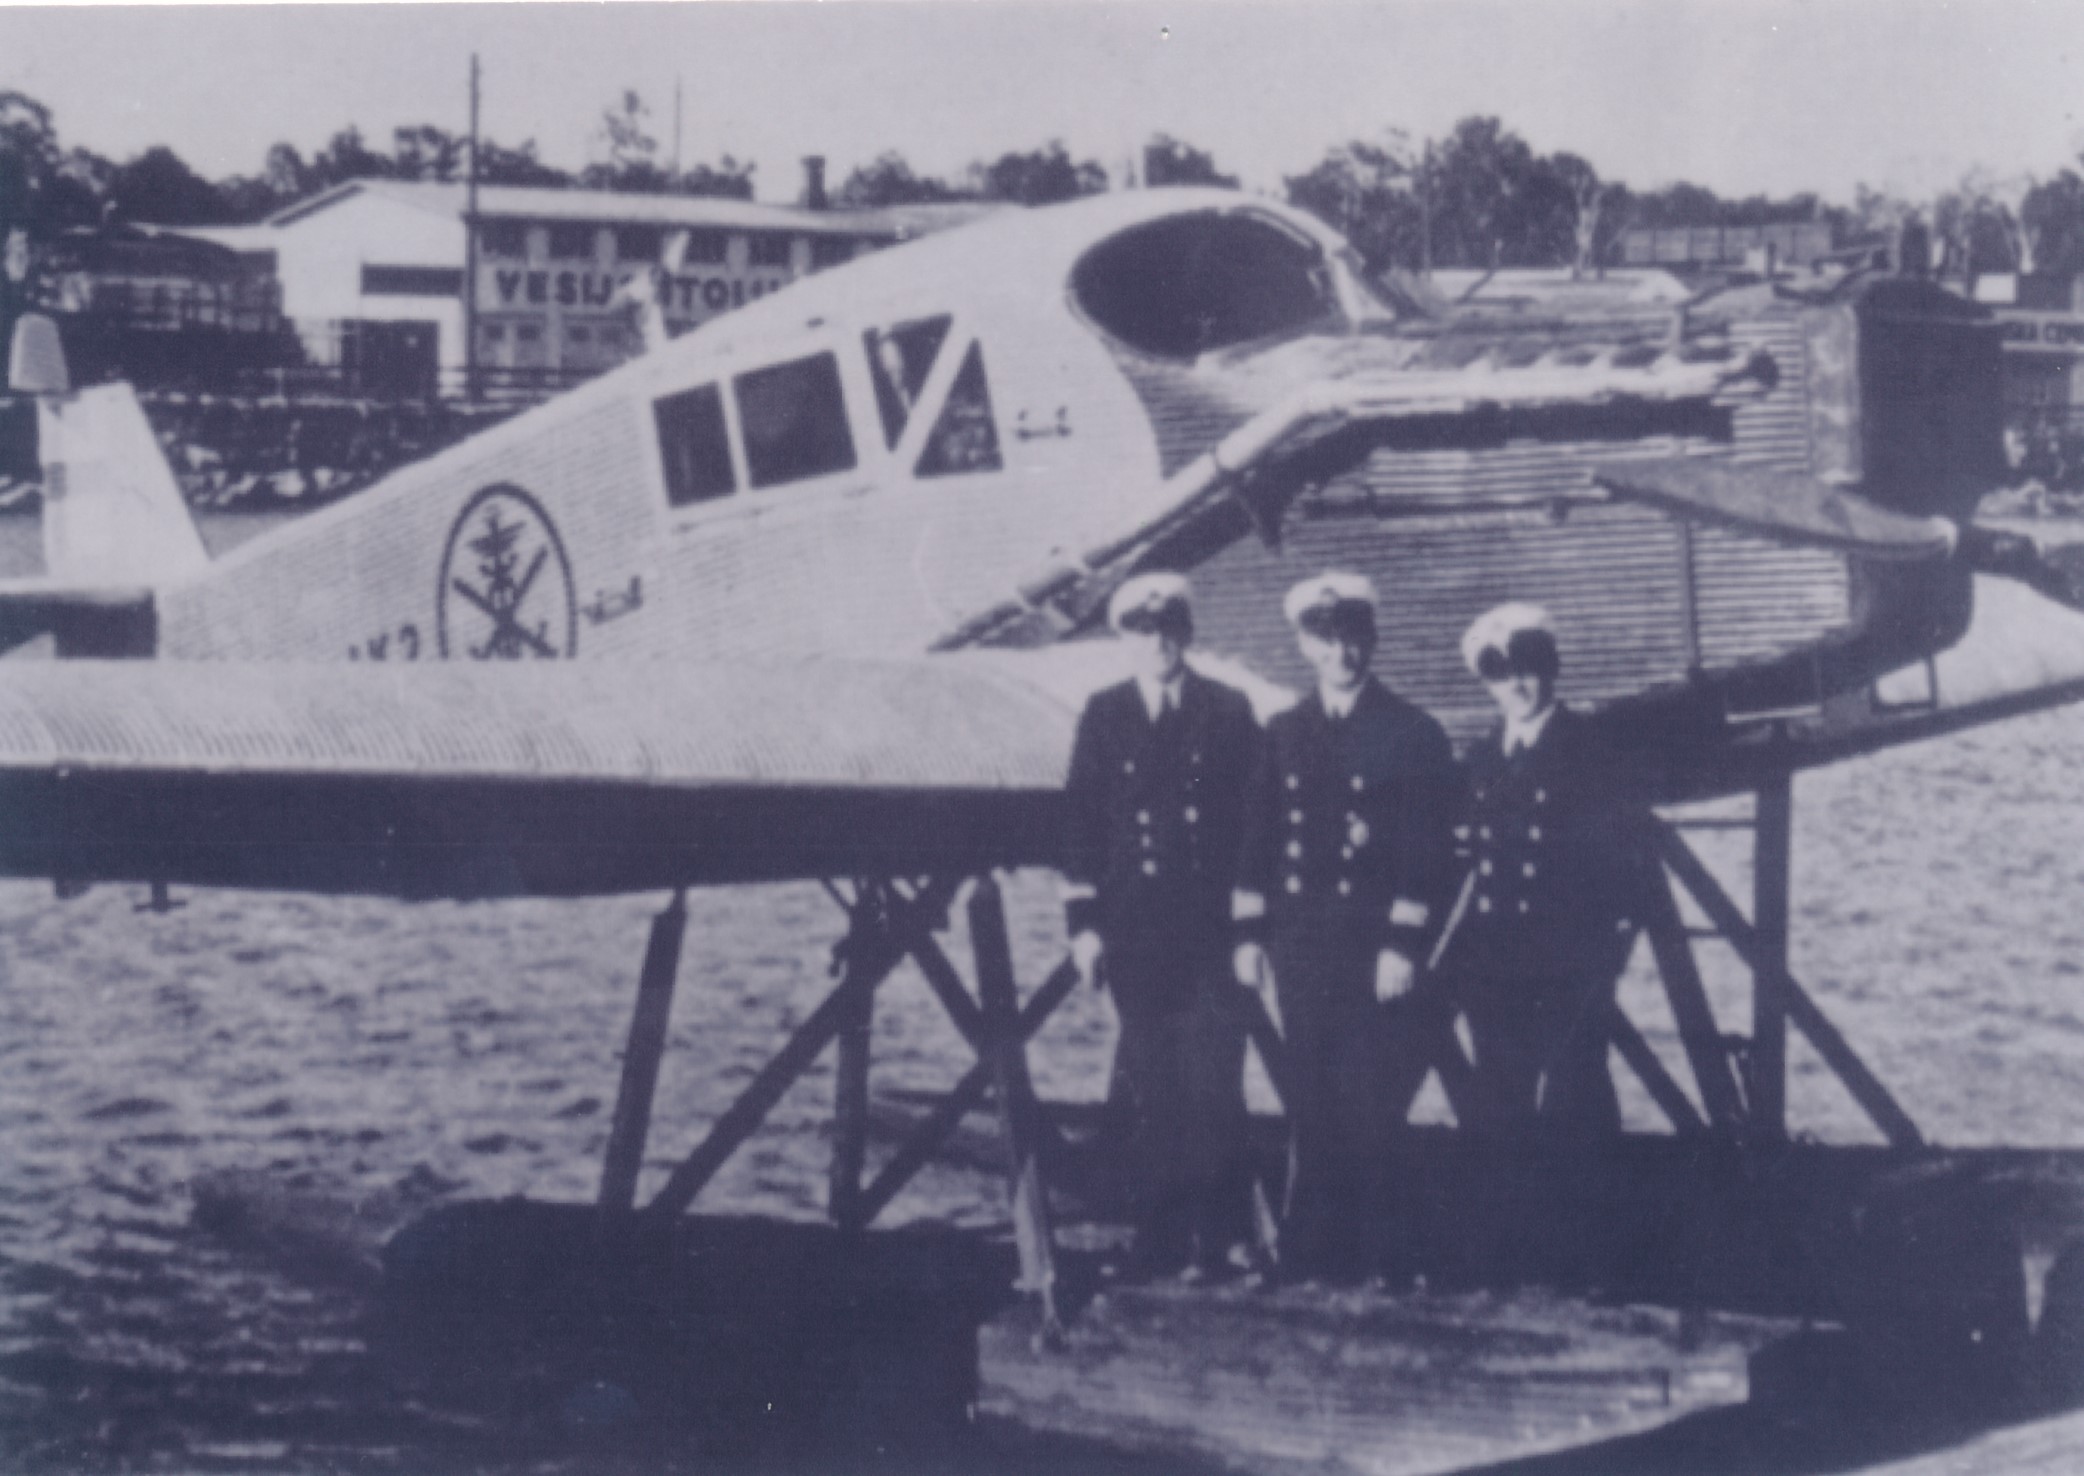 A seaplane, fitted with metallic floats, floating in the water. A uniformed, three-person crew is standing on one of the floats.